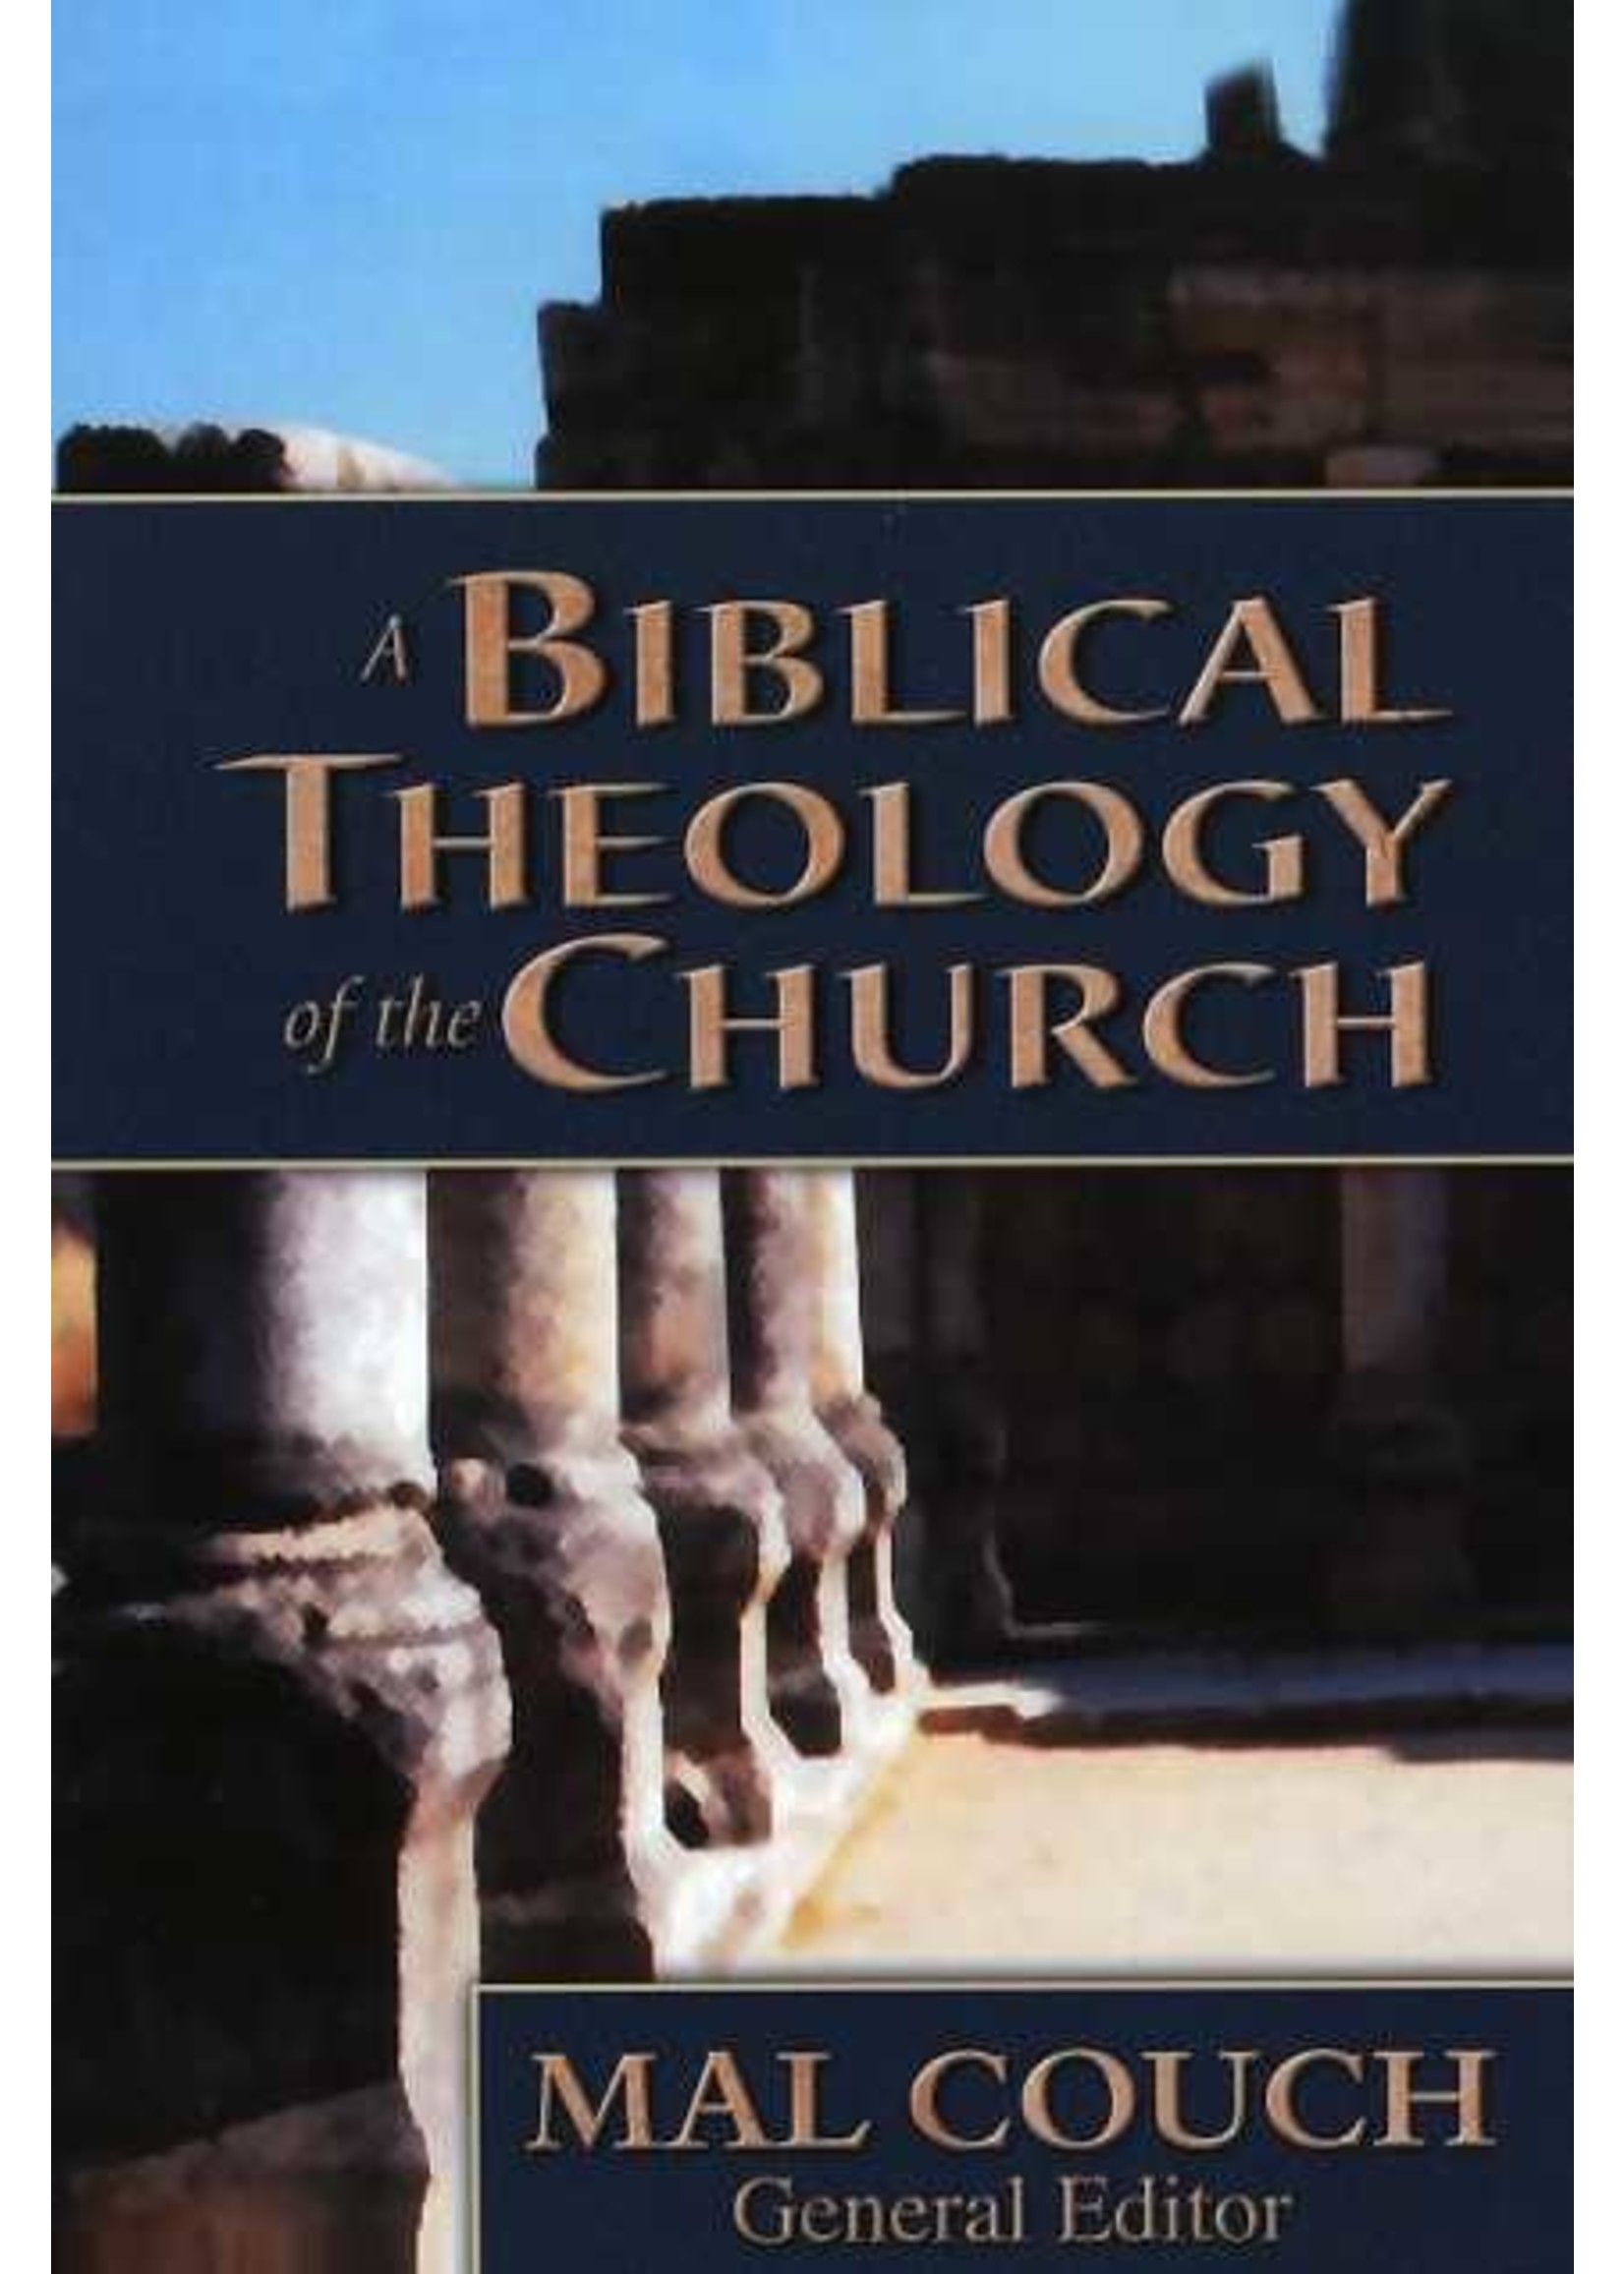 Kregel Publications A Biblical Theology of the Church - Mal Couch